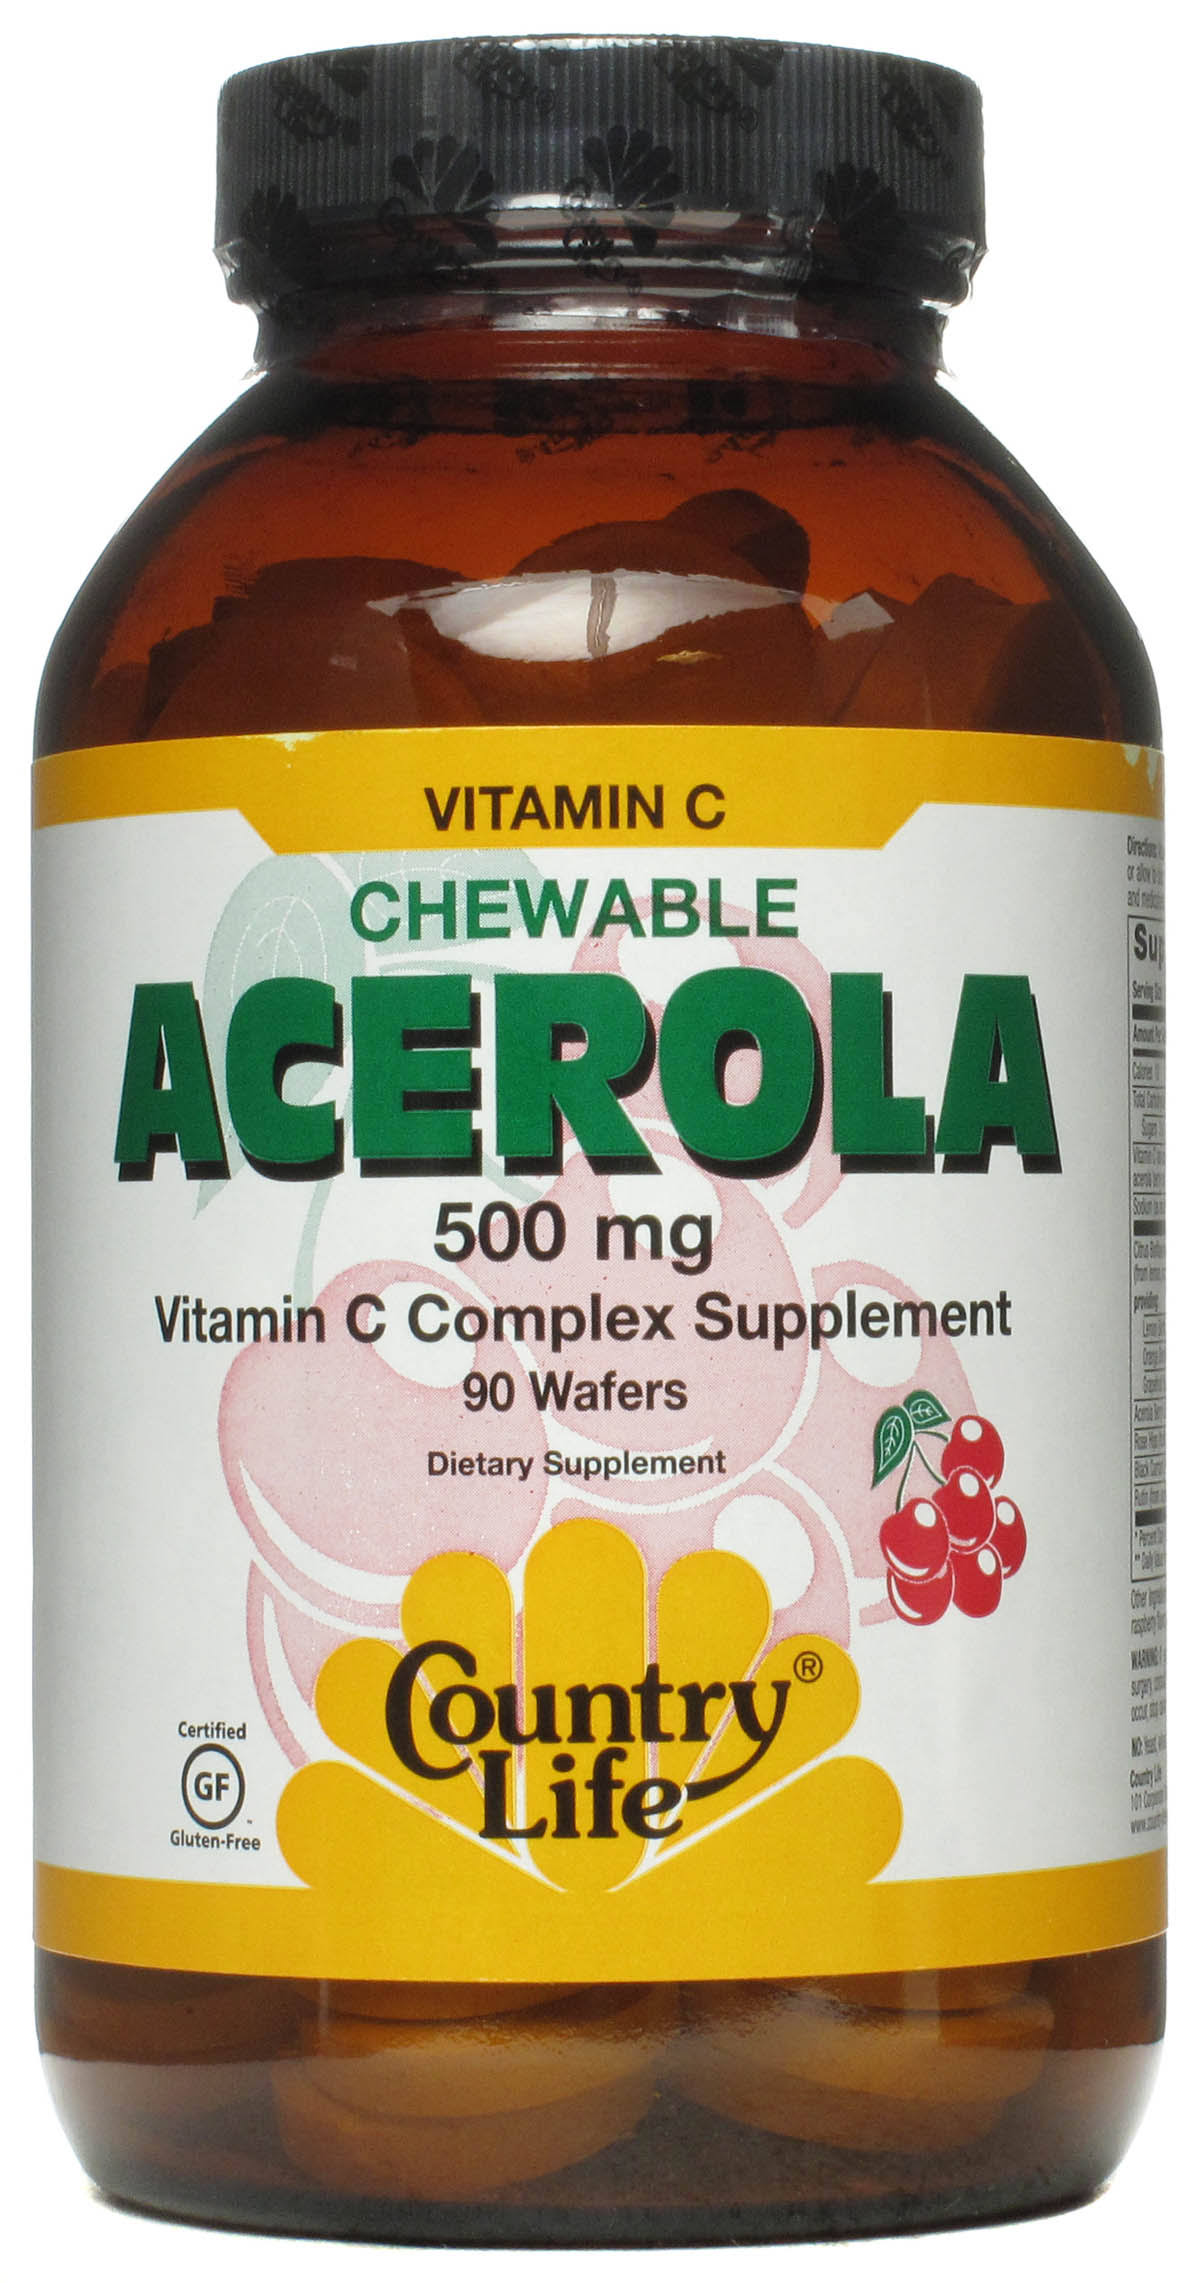 Country Life Acerola Vitamin C - Chewable, Cherry, 90 Wafers